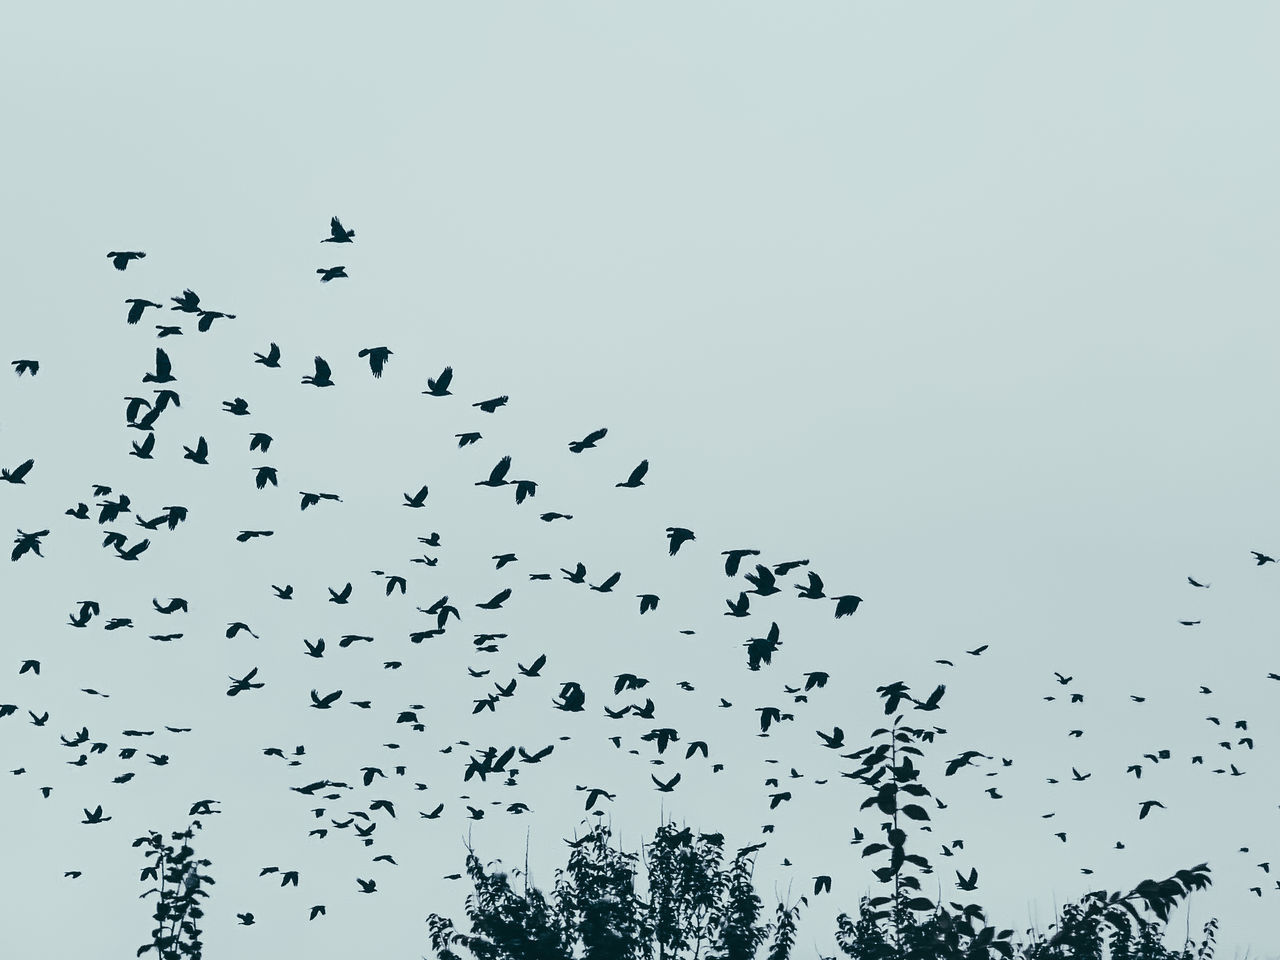 large group of animals, flock, wildlife, animal wildlife, animal themes, animal, flock of birds, group of animals, bird, flying, bird migration, animal migration, sky, line, no people, nature, silhouette, mid-air, low angle view, motion, beauty in nature, black and white, branch, outdoors, tree, day, togetherness